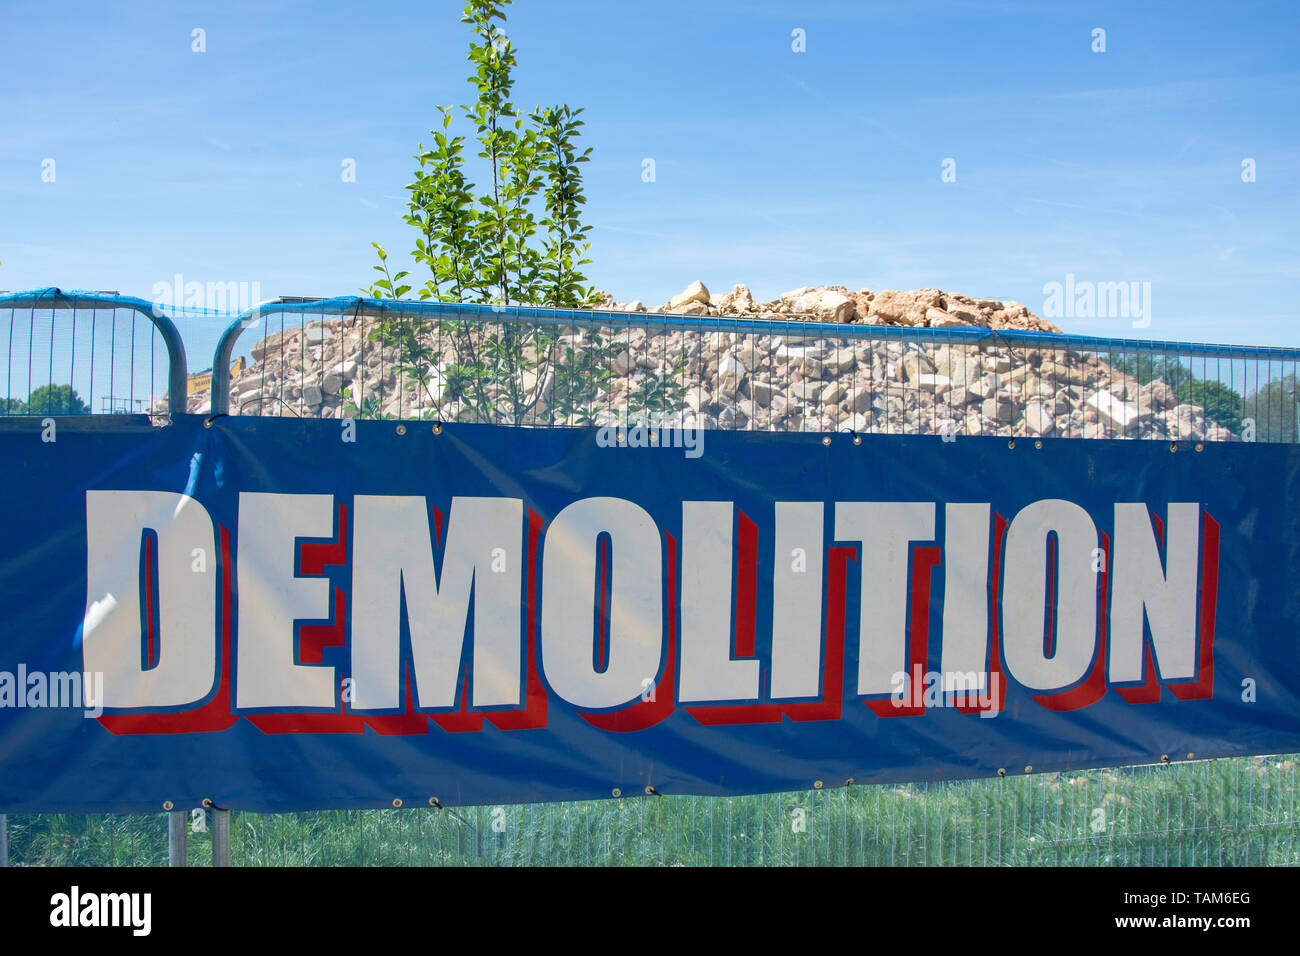 Demolition sign with pile of bricks, concrete and rubble at excavation building site, Egham, Surrey, England, United Kingdom Stock Photo